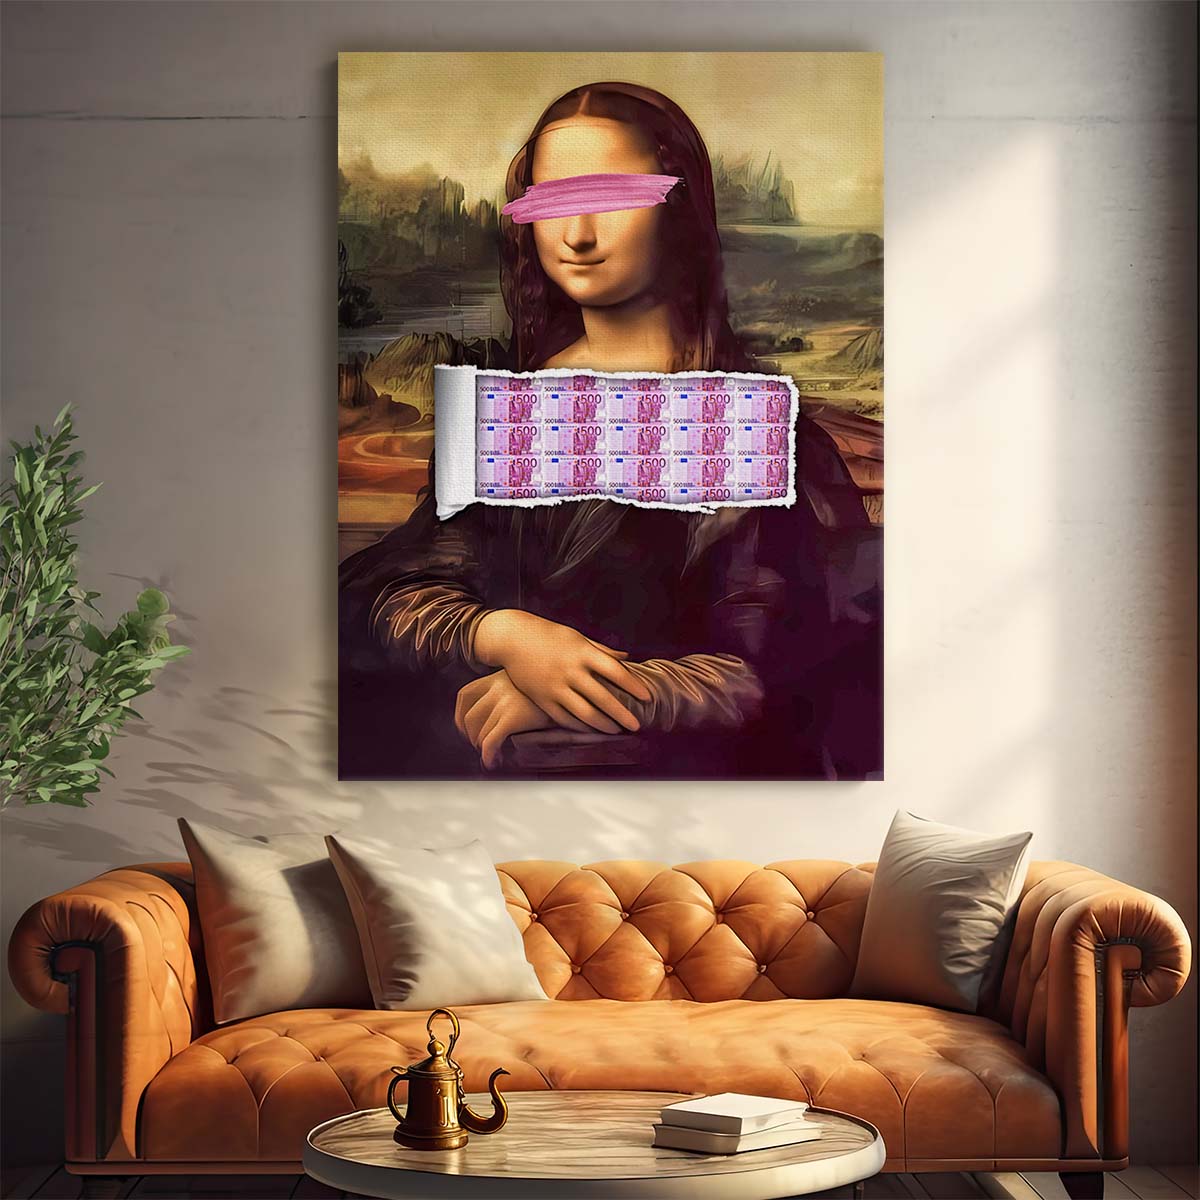 Money Lisa 500 Wall Art by Luxuriance Designs. Made in USA.